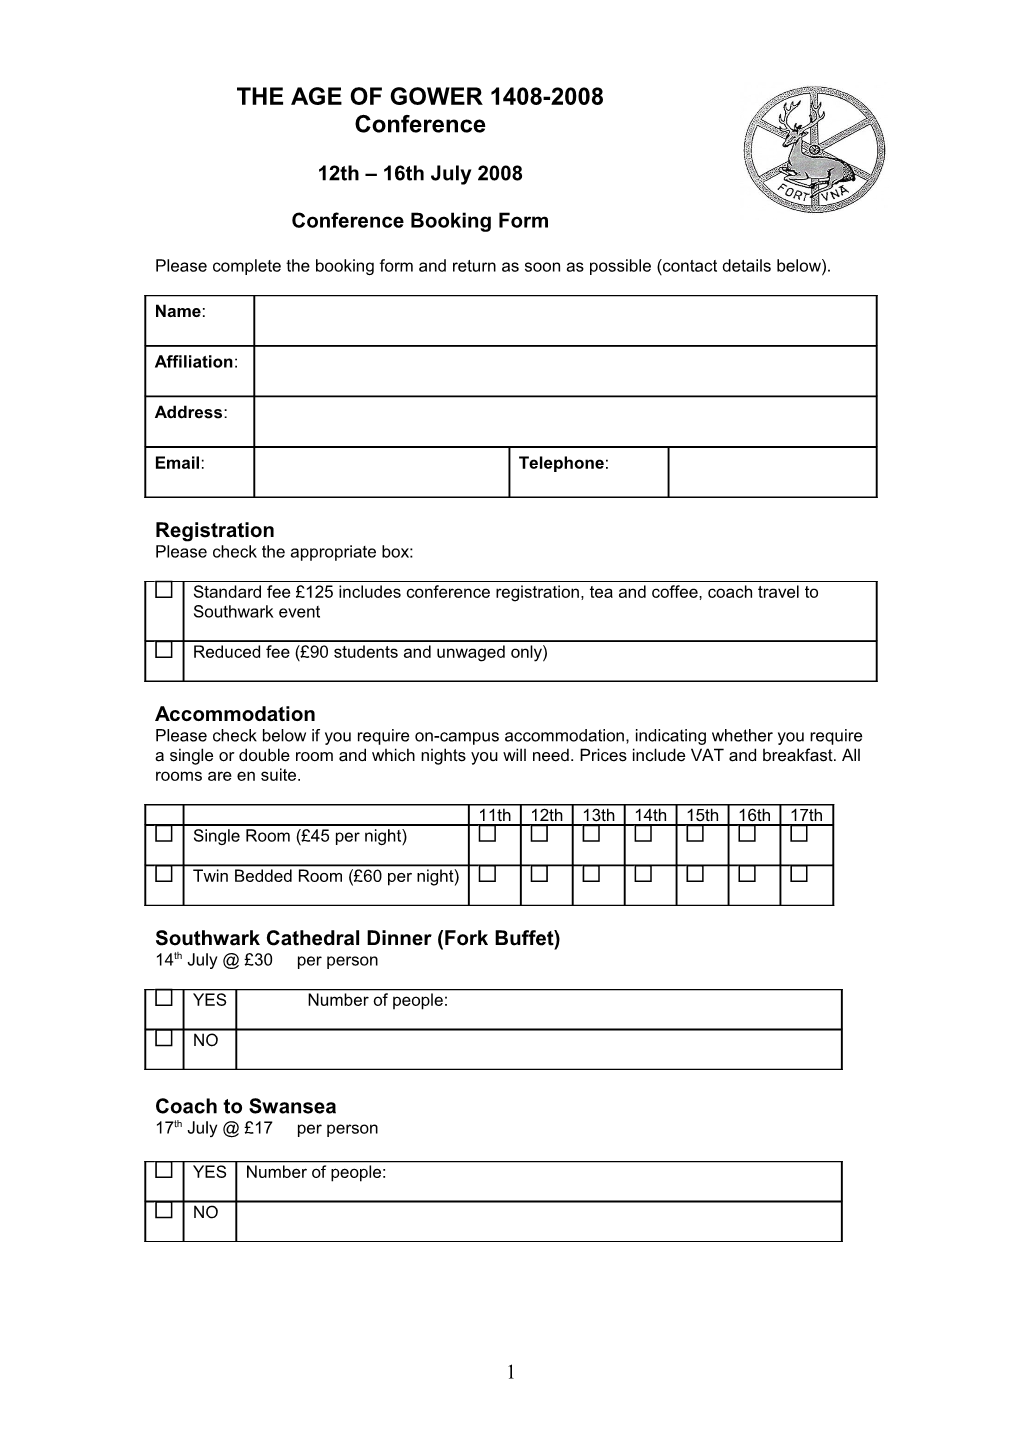 Please Complete the Form and Return It to A